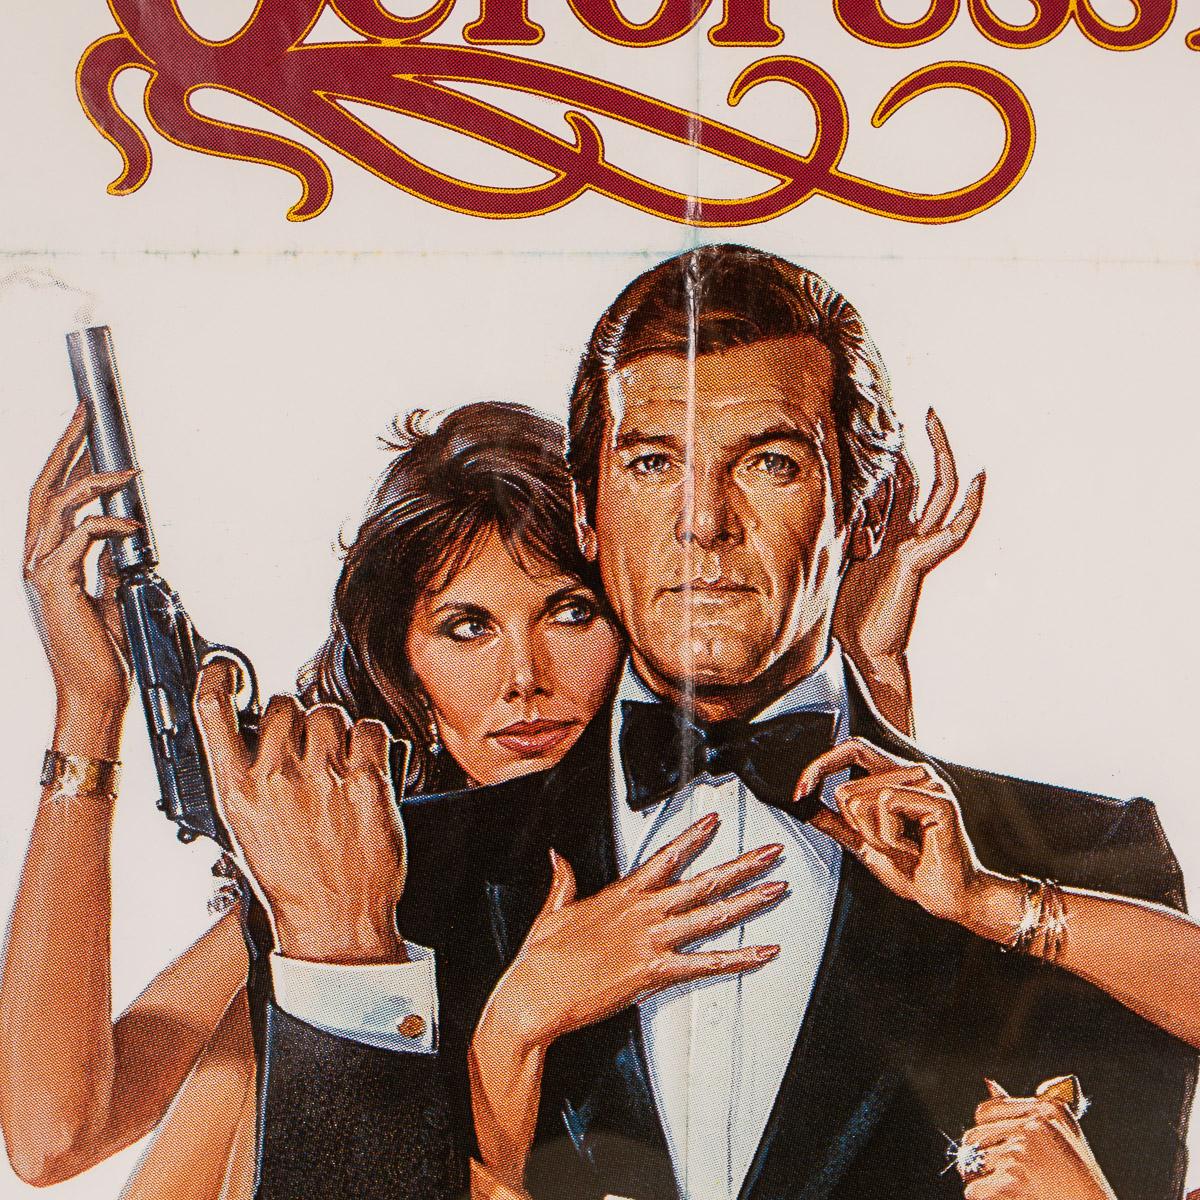 Paper Original French Release James Bond 'Octopussy' Poster, 1983